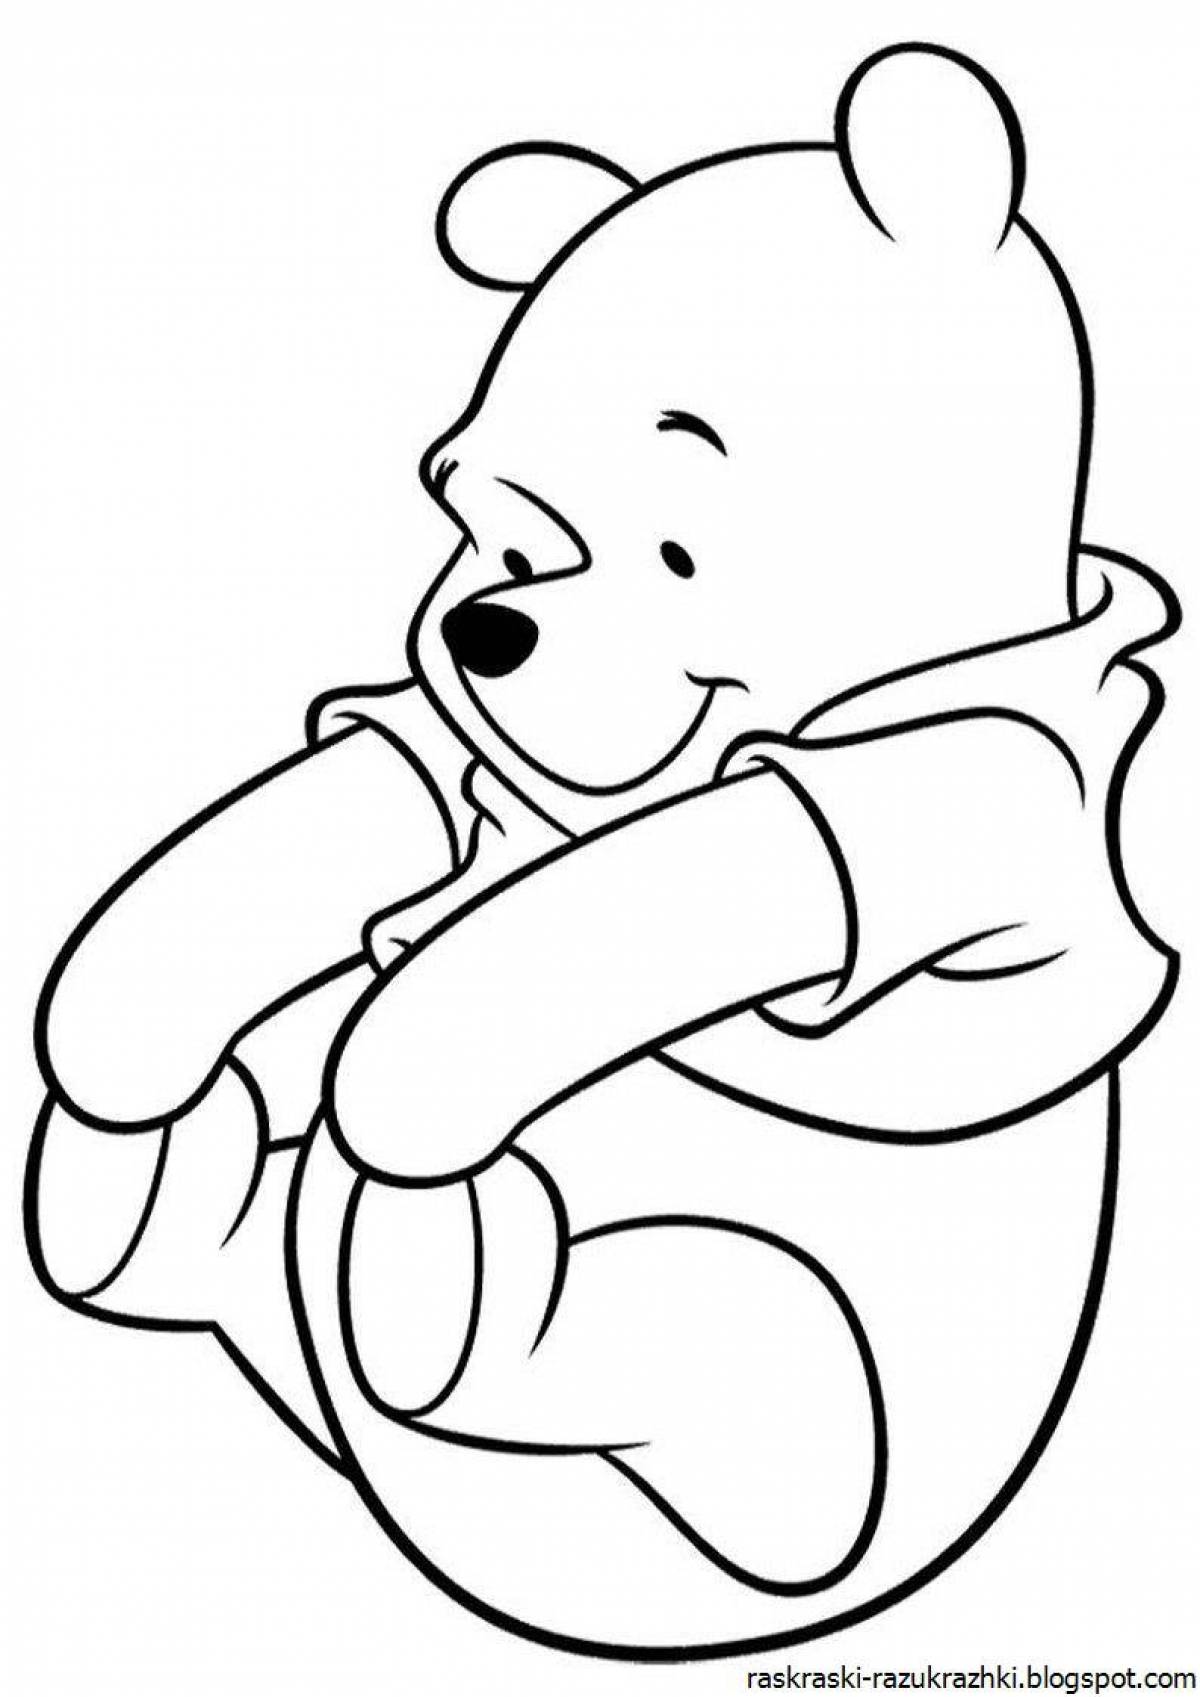 Winnie the pooh quirky coloring book